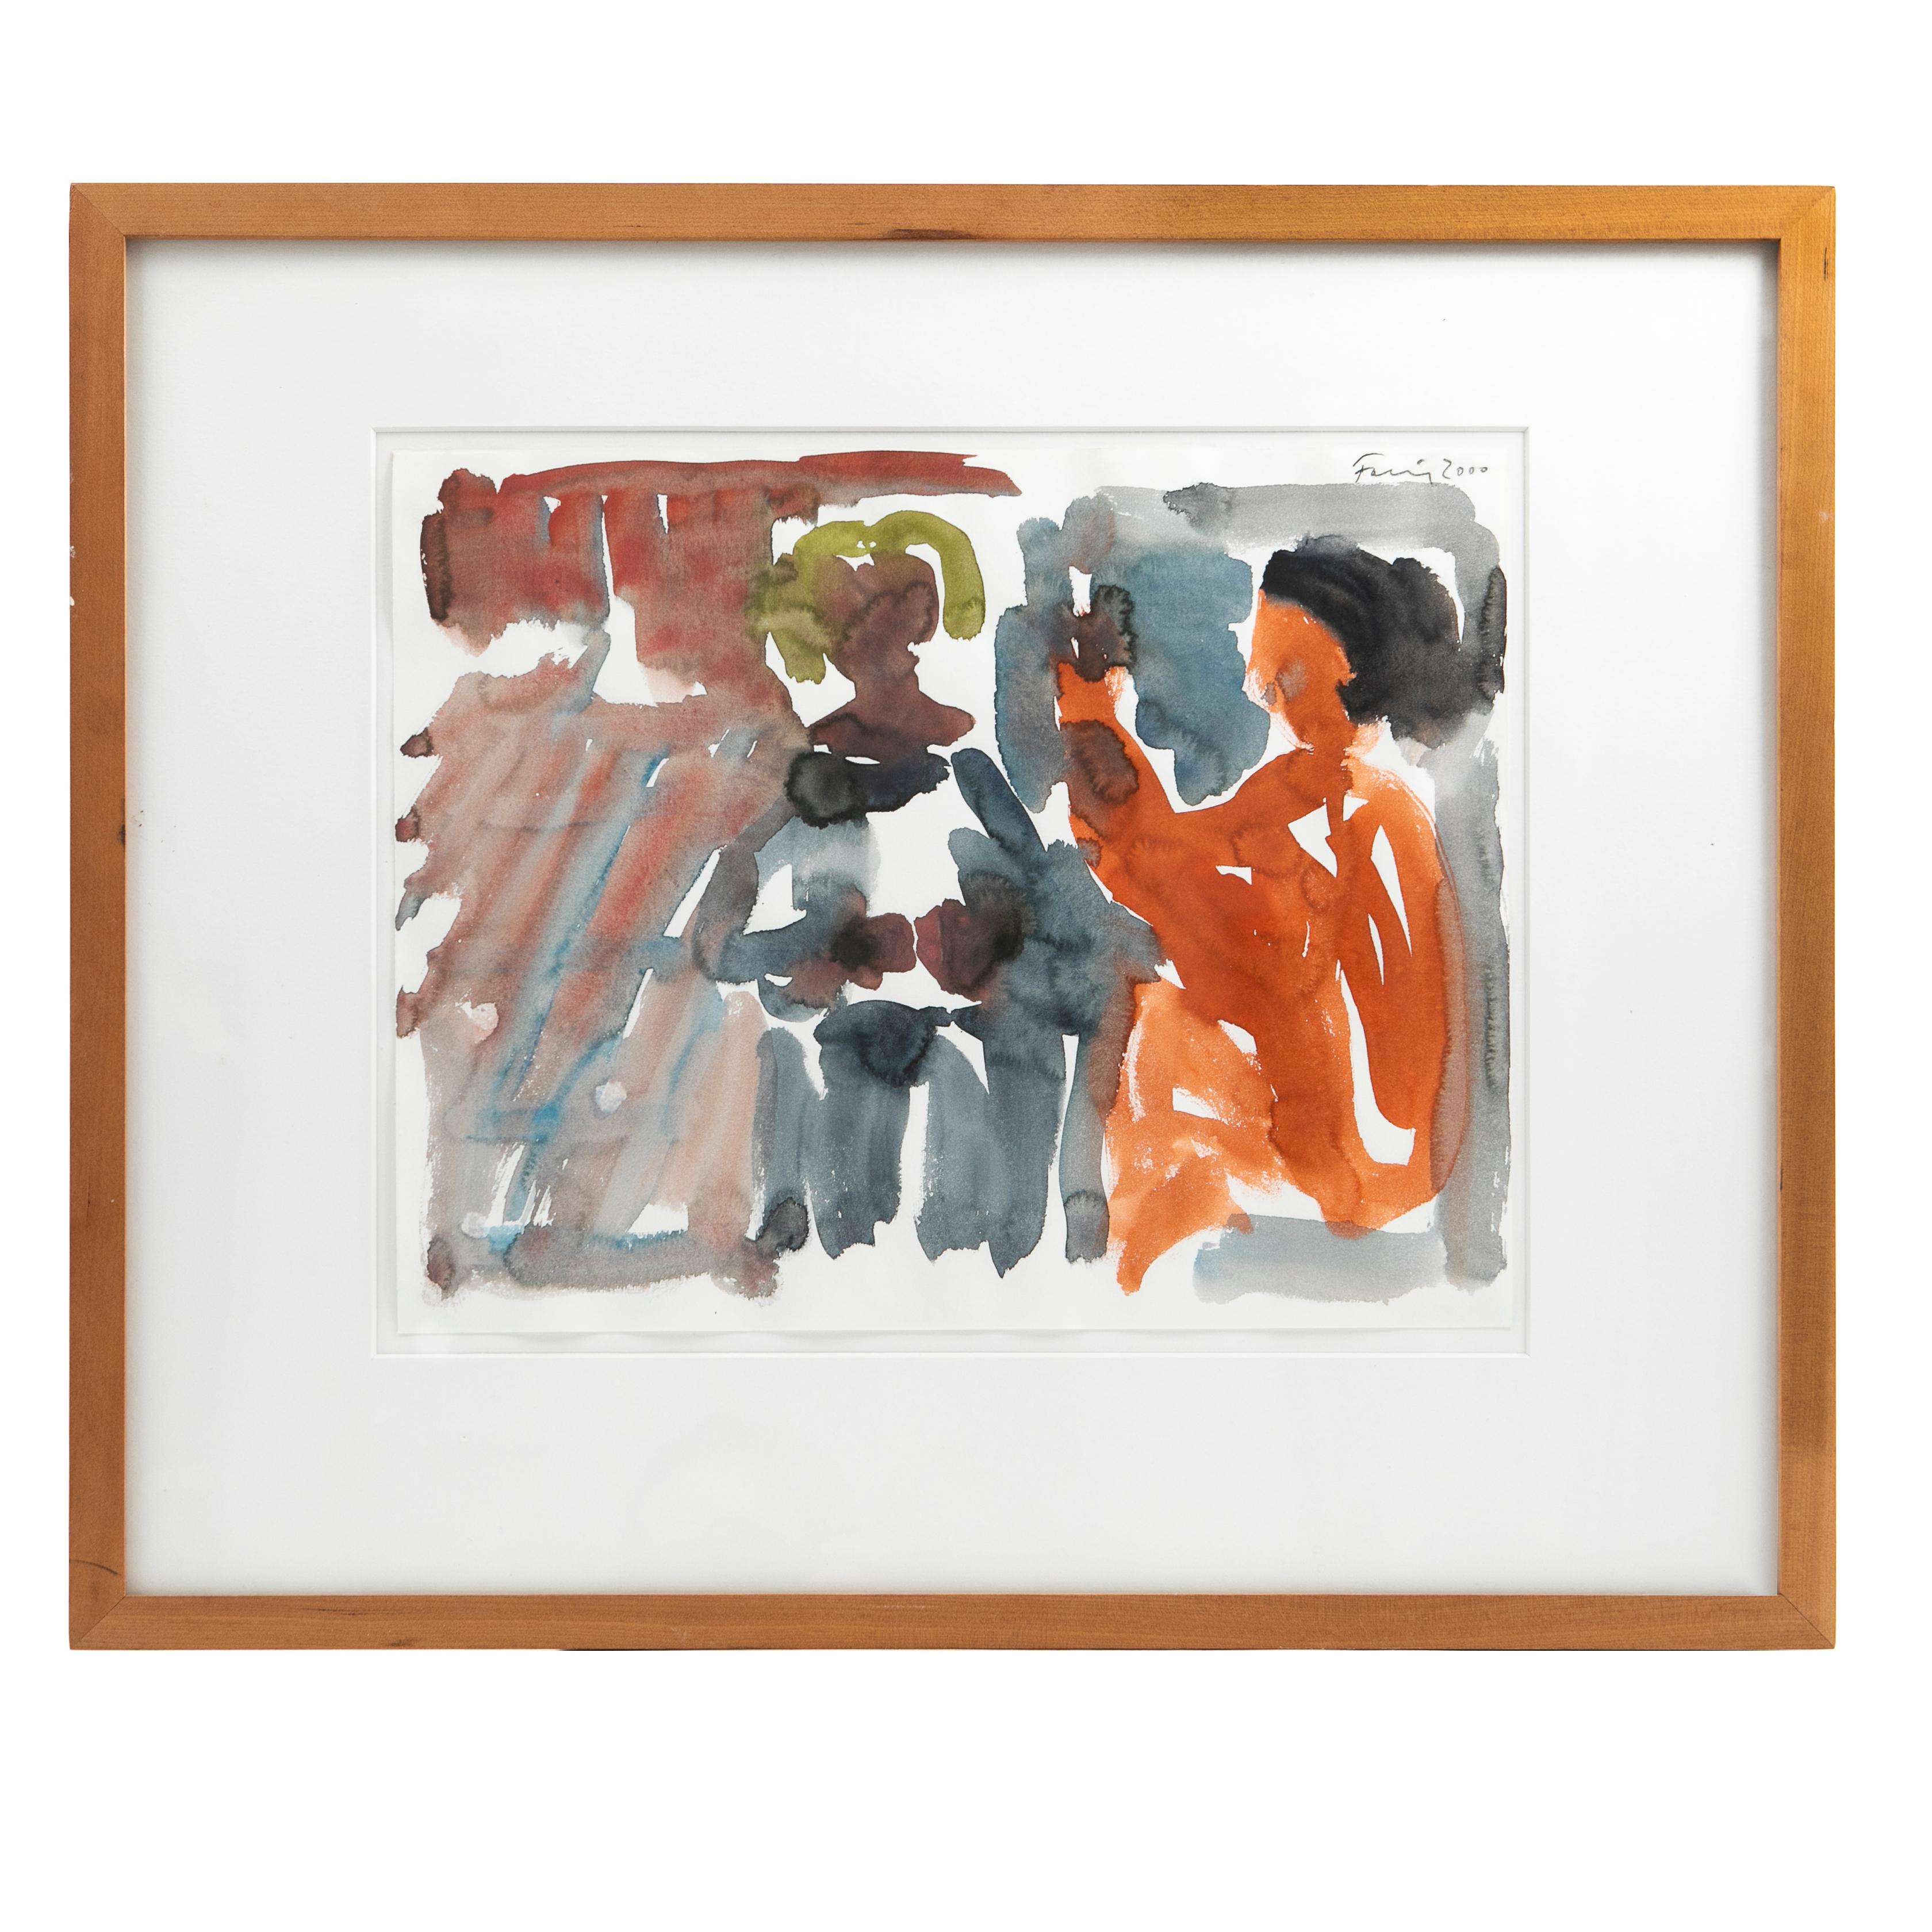 Günther Förg.
Painting. Watercolor on paper. Sheet size: 32 x 40 cm.
Wood frame with passepartout. Frame size: 53 x 63 cm.
Signed Förg, 2000 


Günther Förg (1952 - 2013) was a prominent German painter, graphic designer, sculptor and photographer.